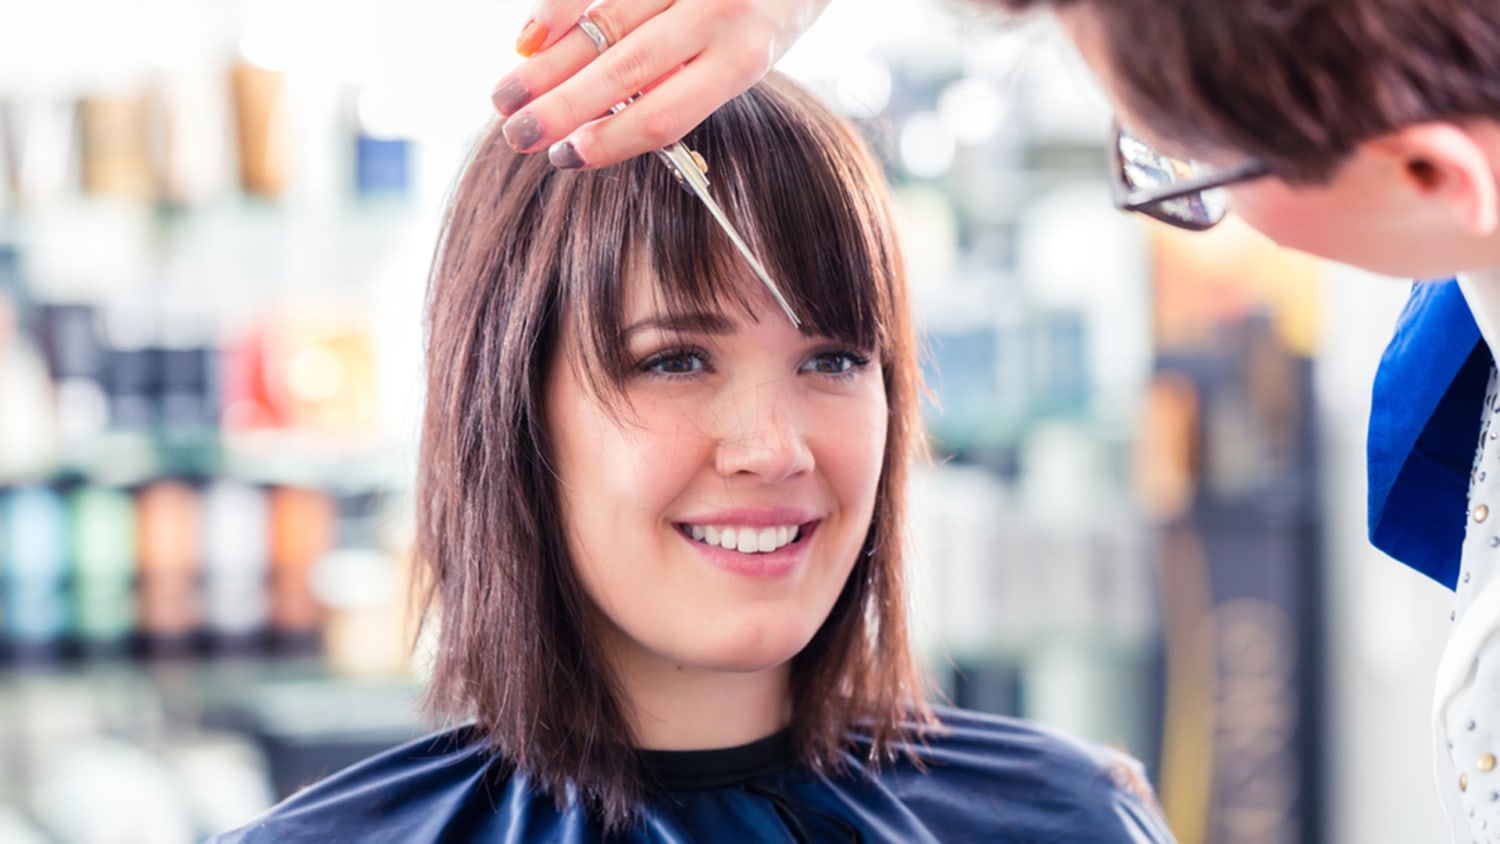 What to Do If You Don't Like Your Haircut or Color